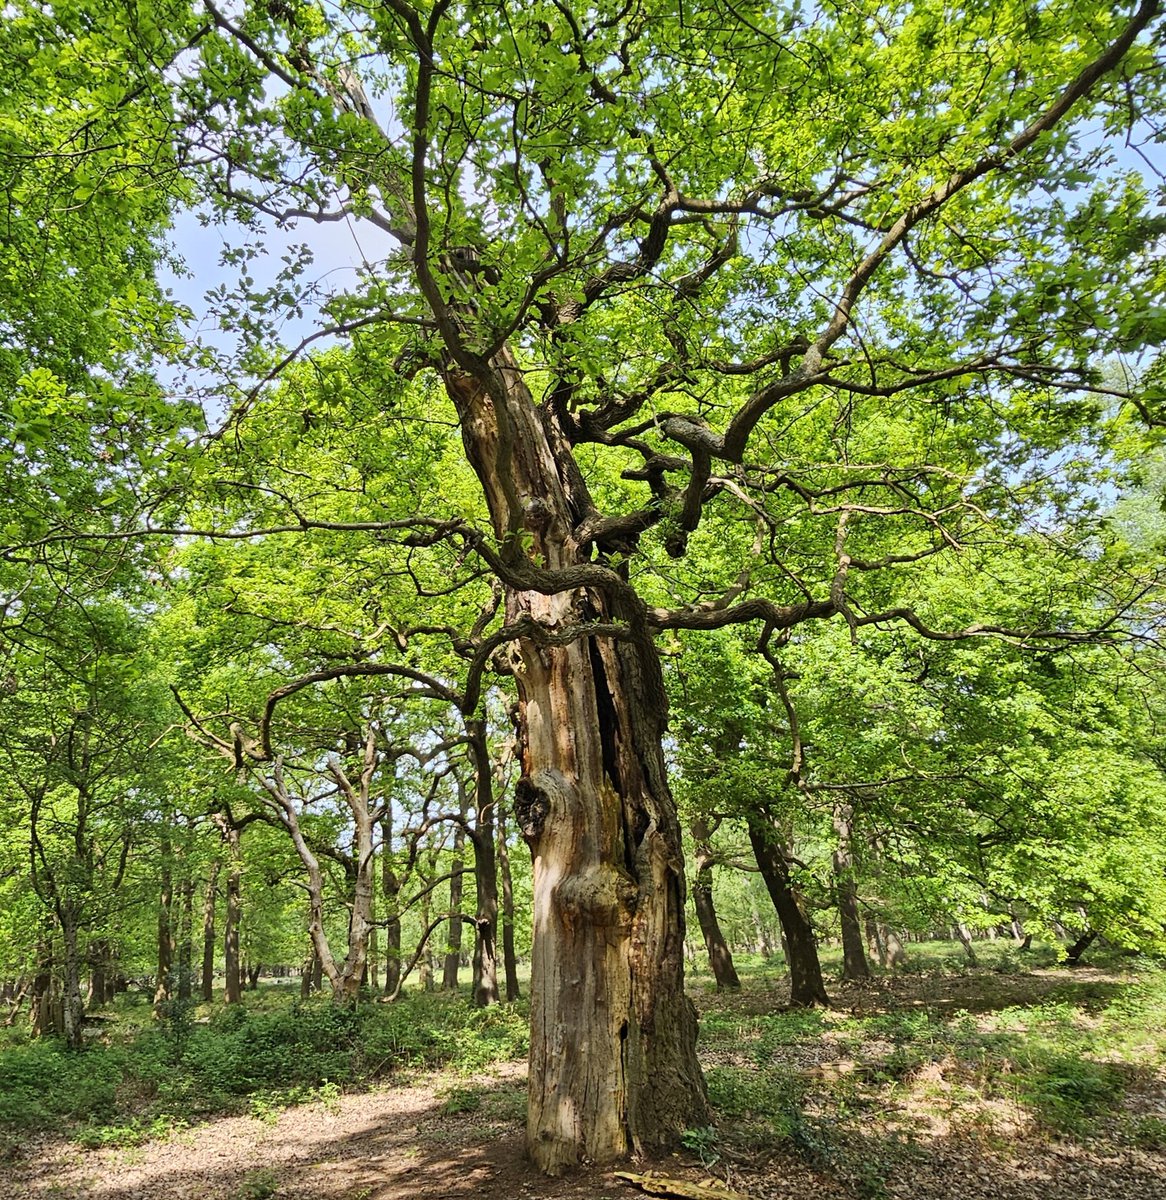 There are hundreds of ancient Oaks in Sherwood Forest that are either dead or dying slowly. They are magnificent. I was lost for word at the thought of trees growing in this place for long generation after long generation for thousands of years!